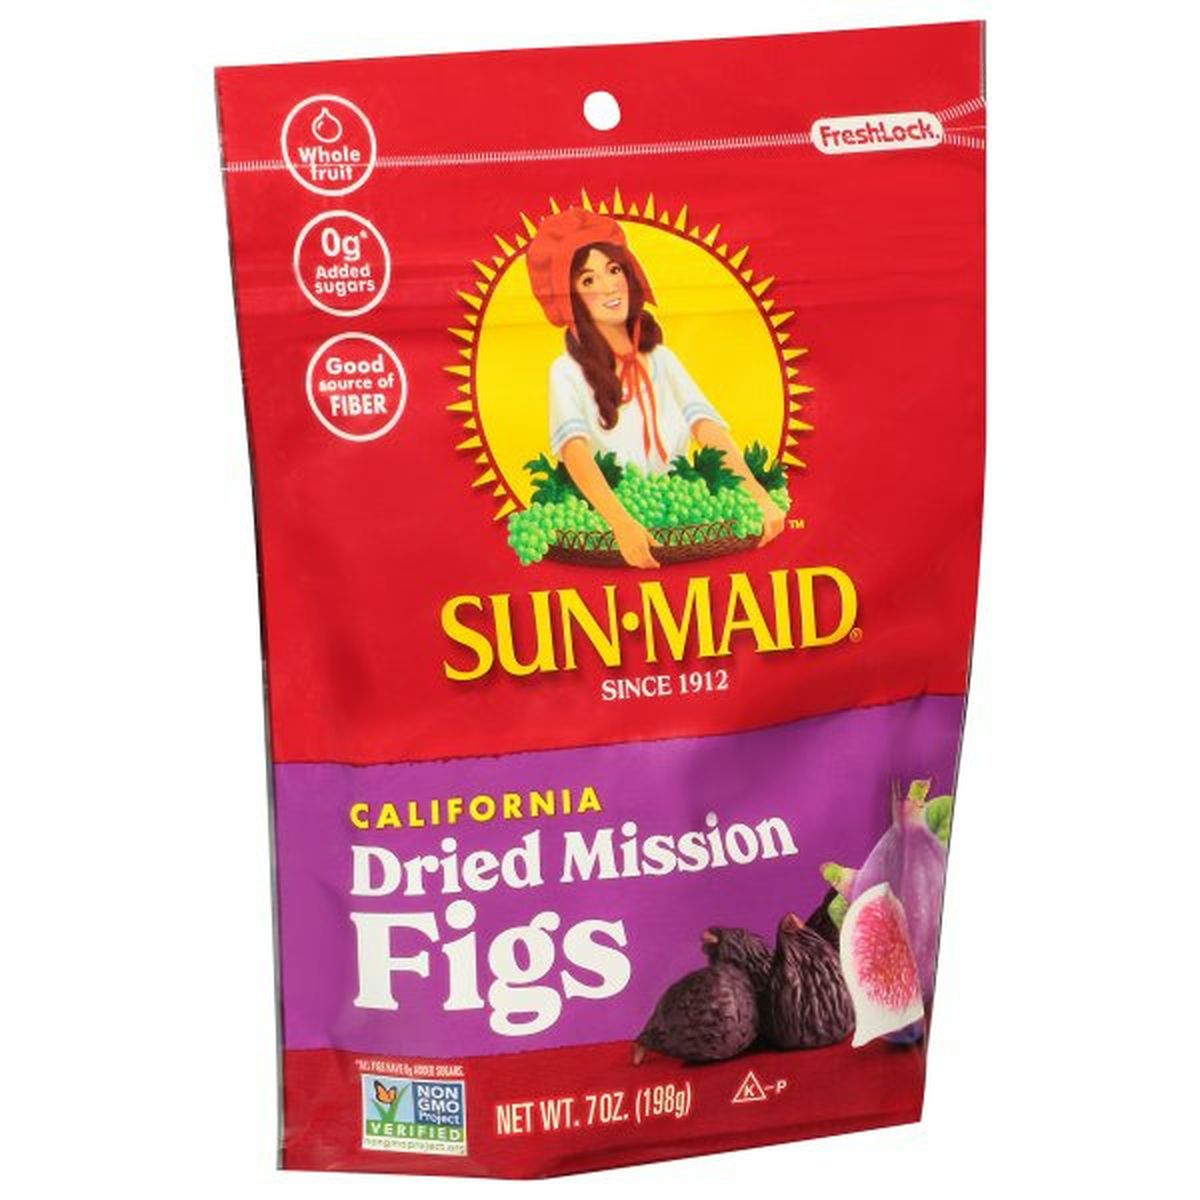 Calories in Sun-Maid Mission Figs, California, Dried